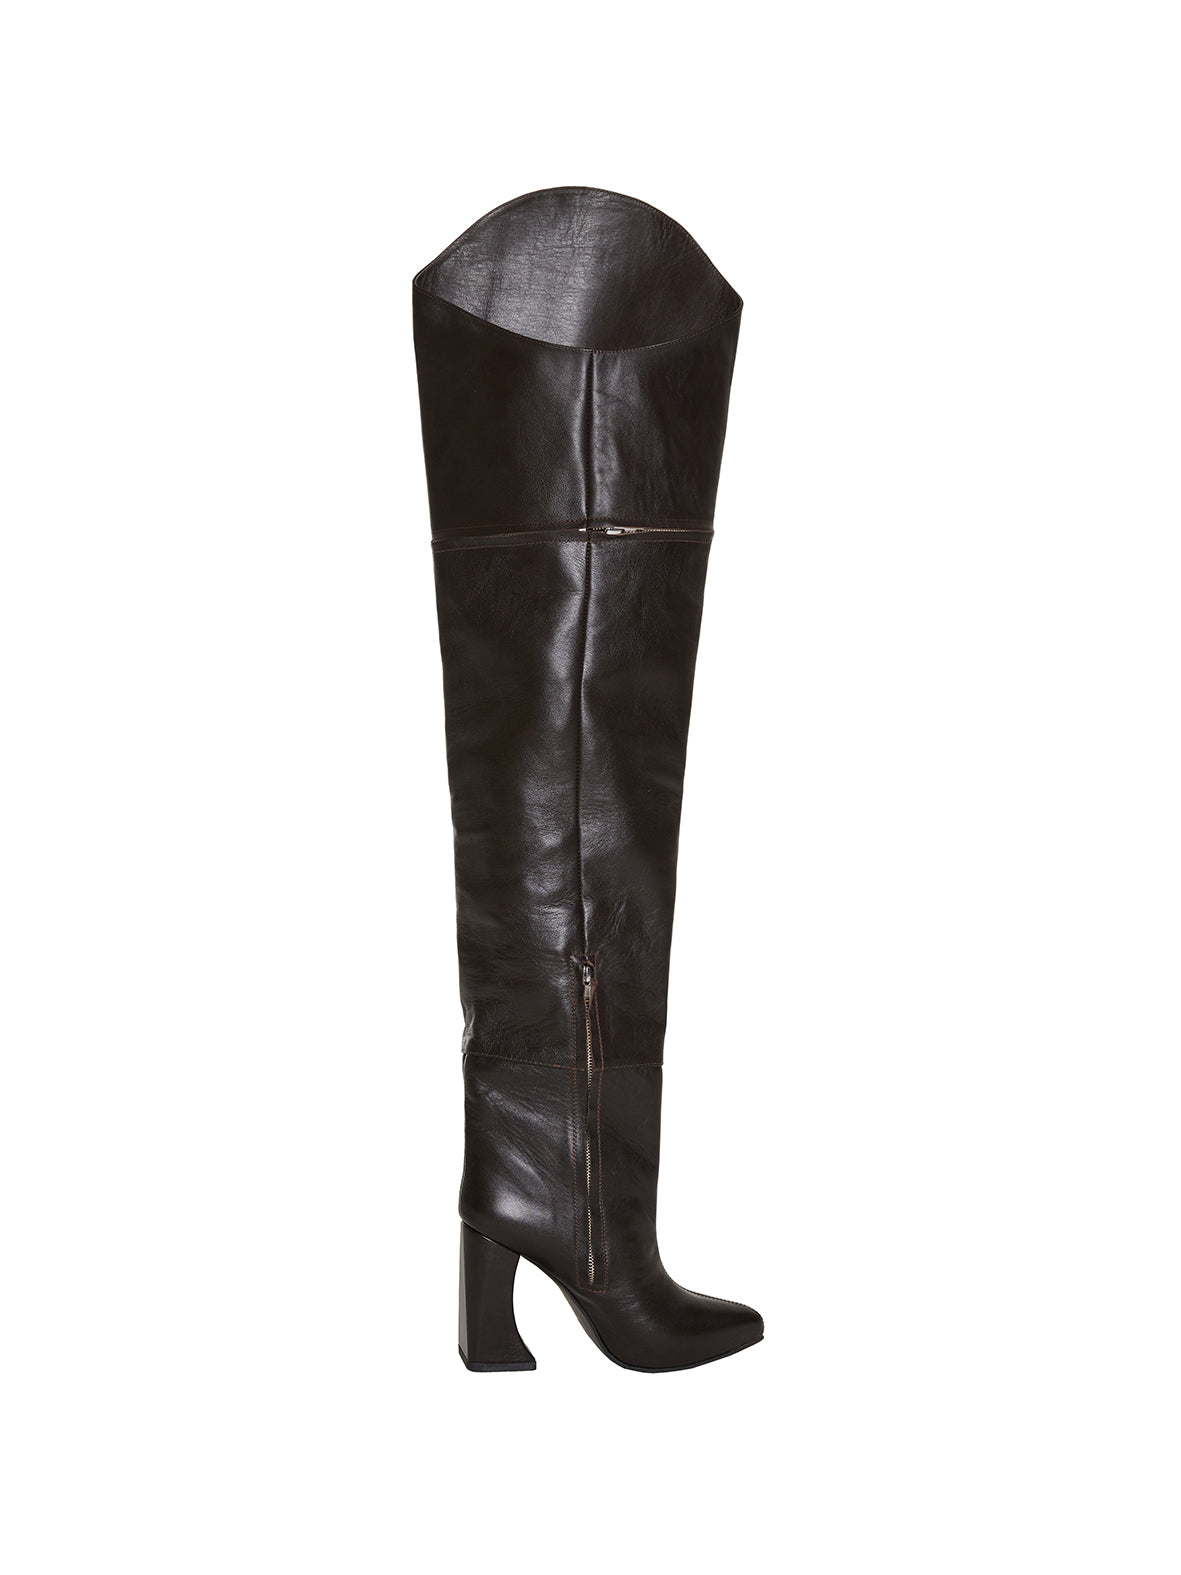 G-out leather boots